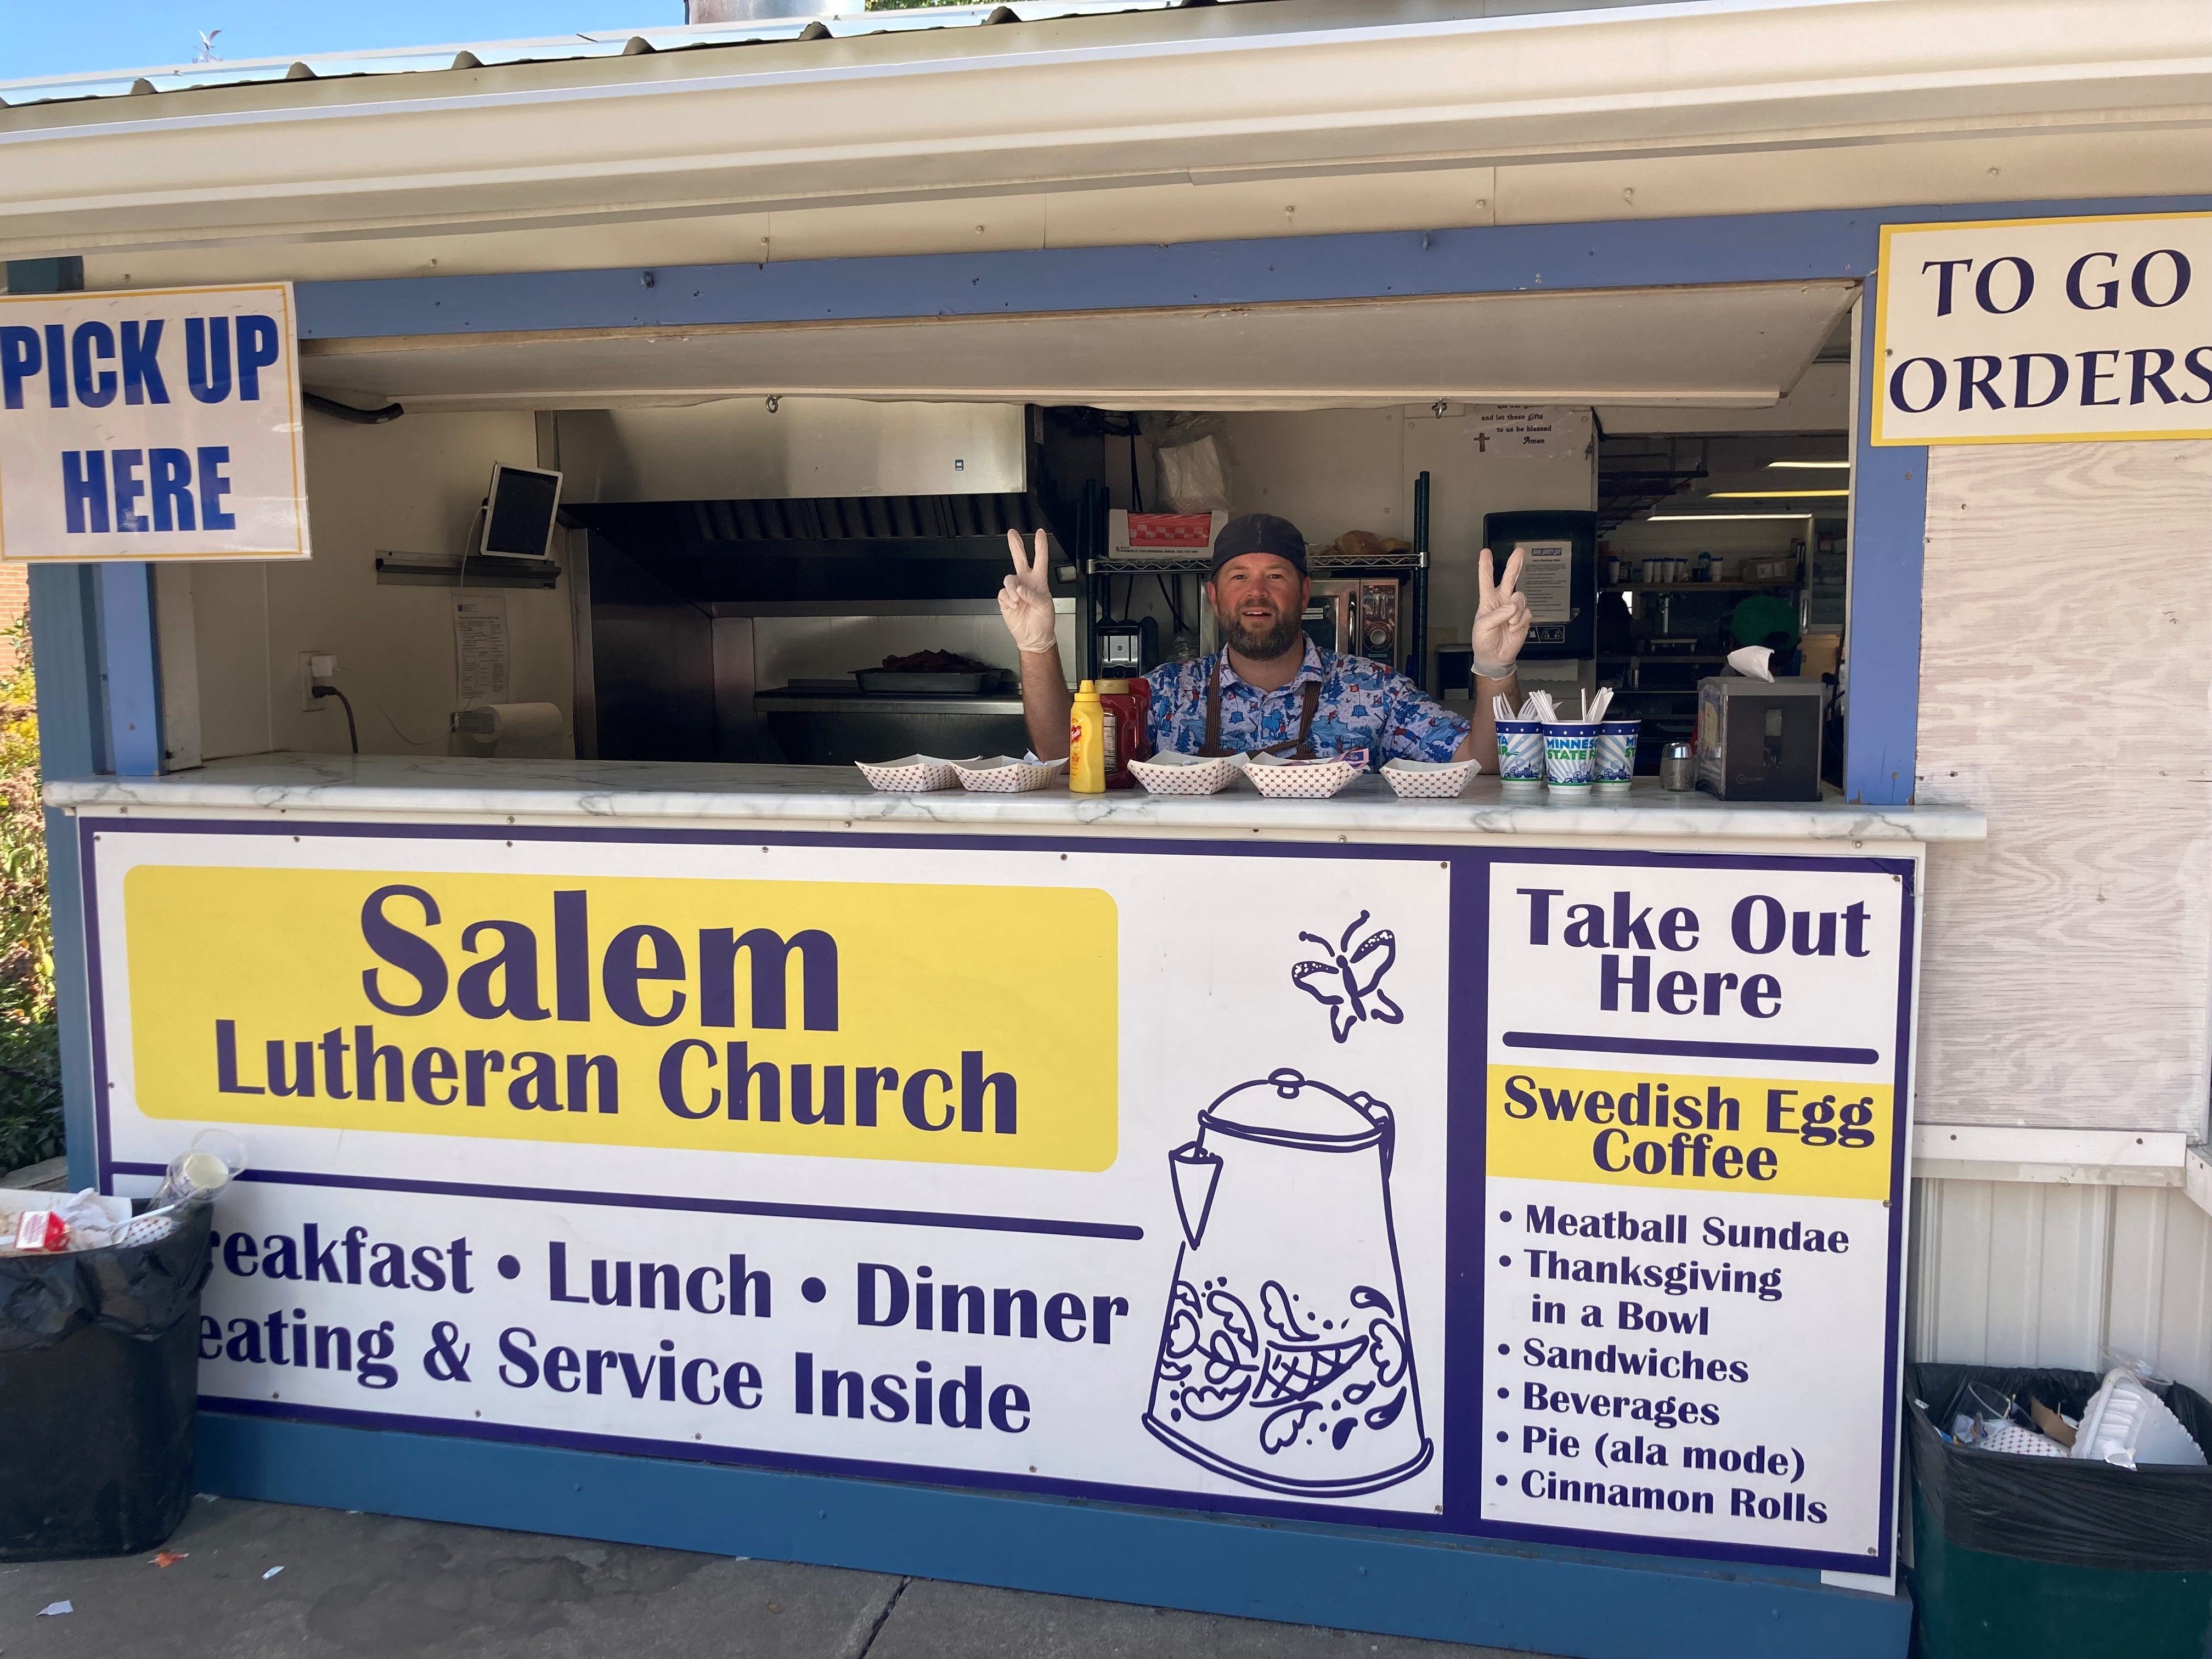 Pastor Adam from Trinity Lutheran Church in Long Lake helps out at the Salem Lutheran Church dining hall at the Minnesota State Fair.